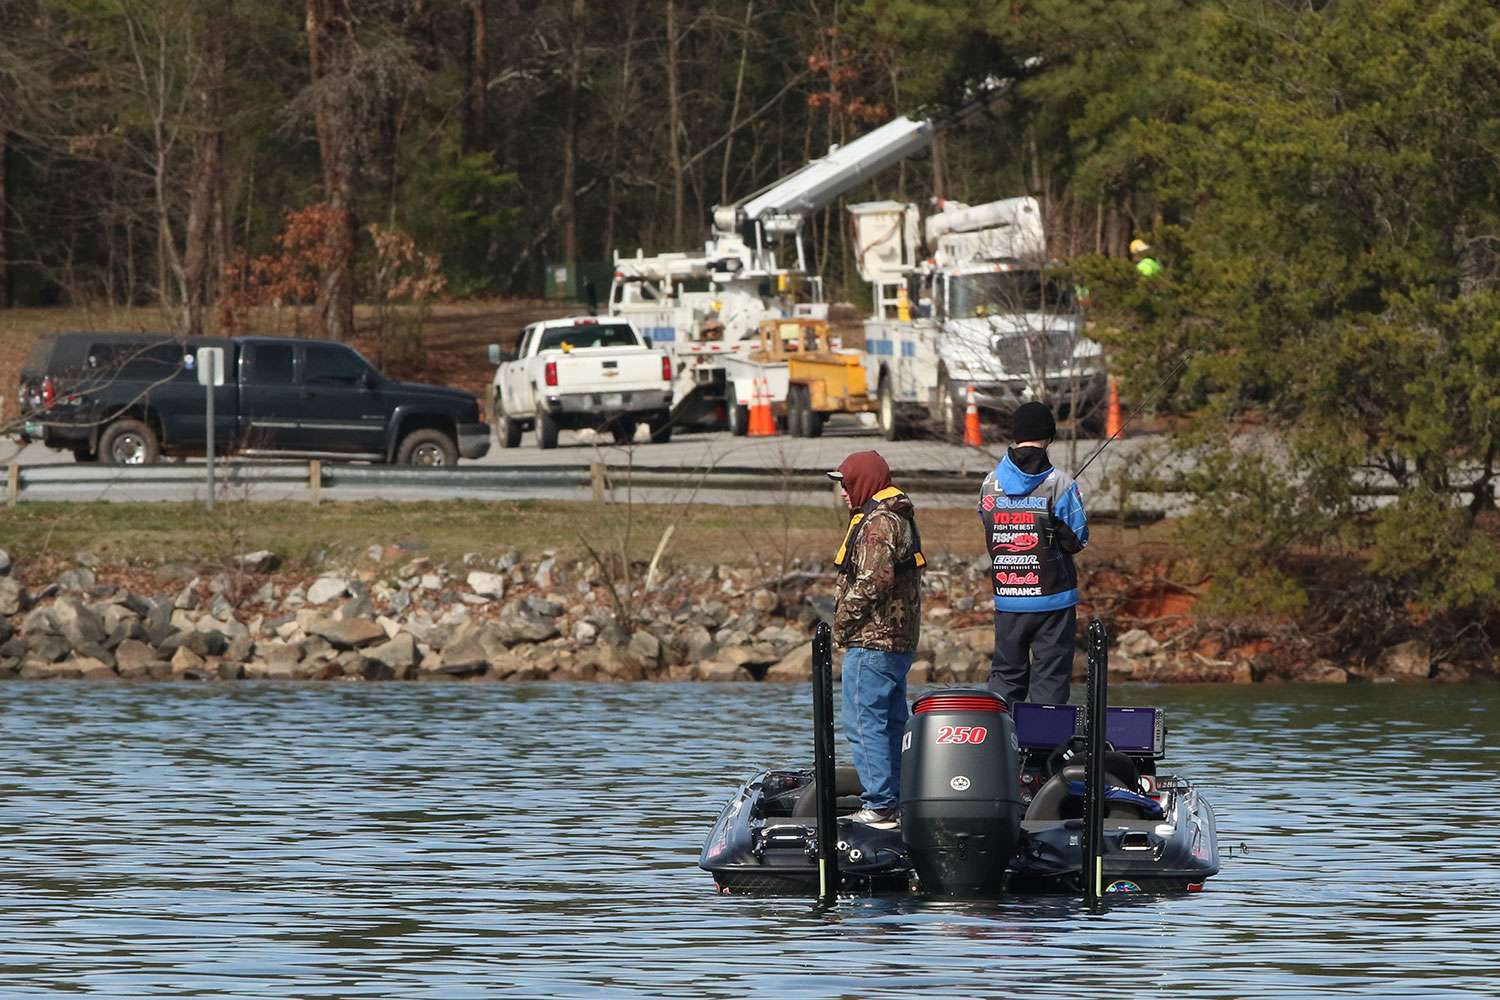 Head out with the Elites as they take on Day 1 of the 2019 Toyota Bassmaster Elite at Lake Lanier!